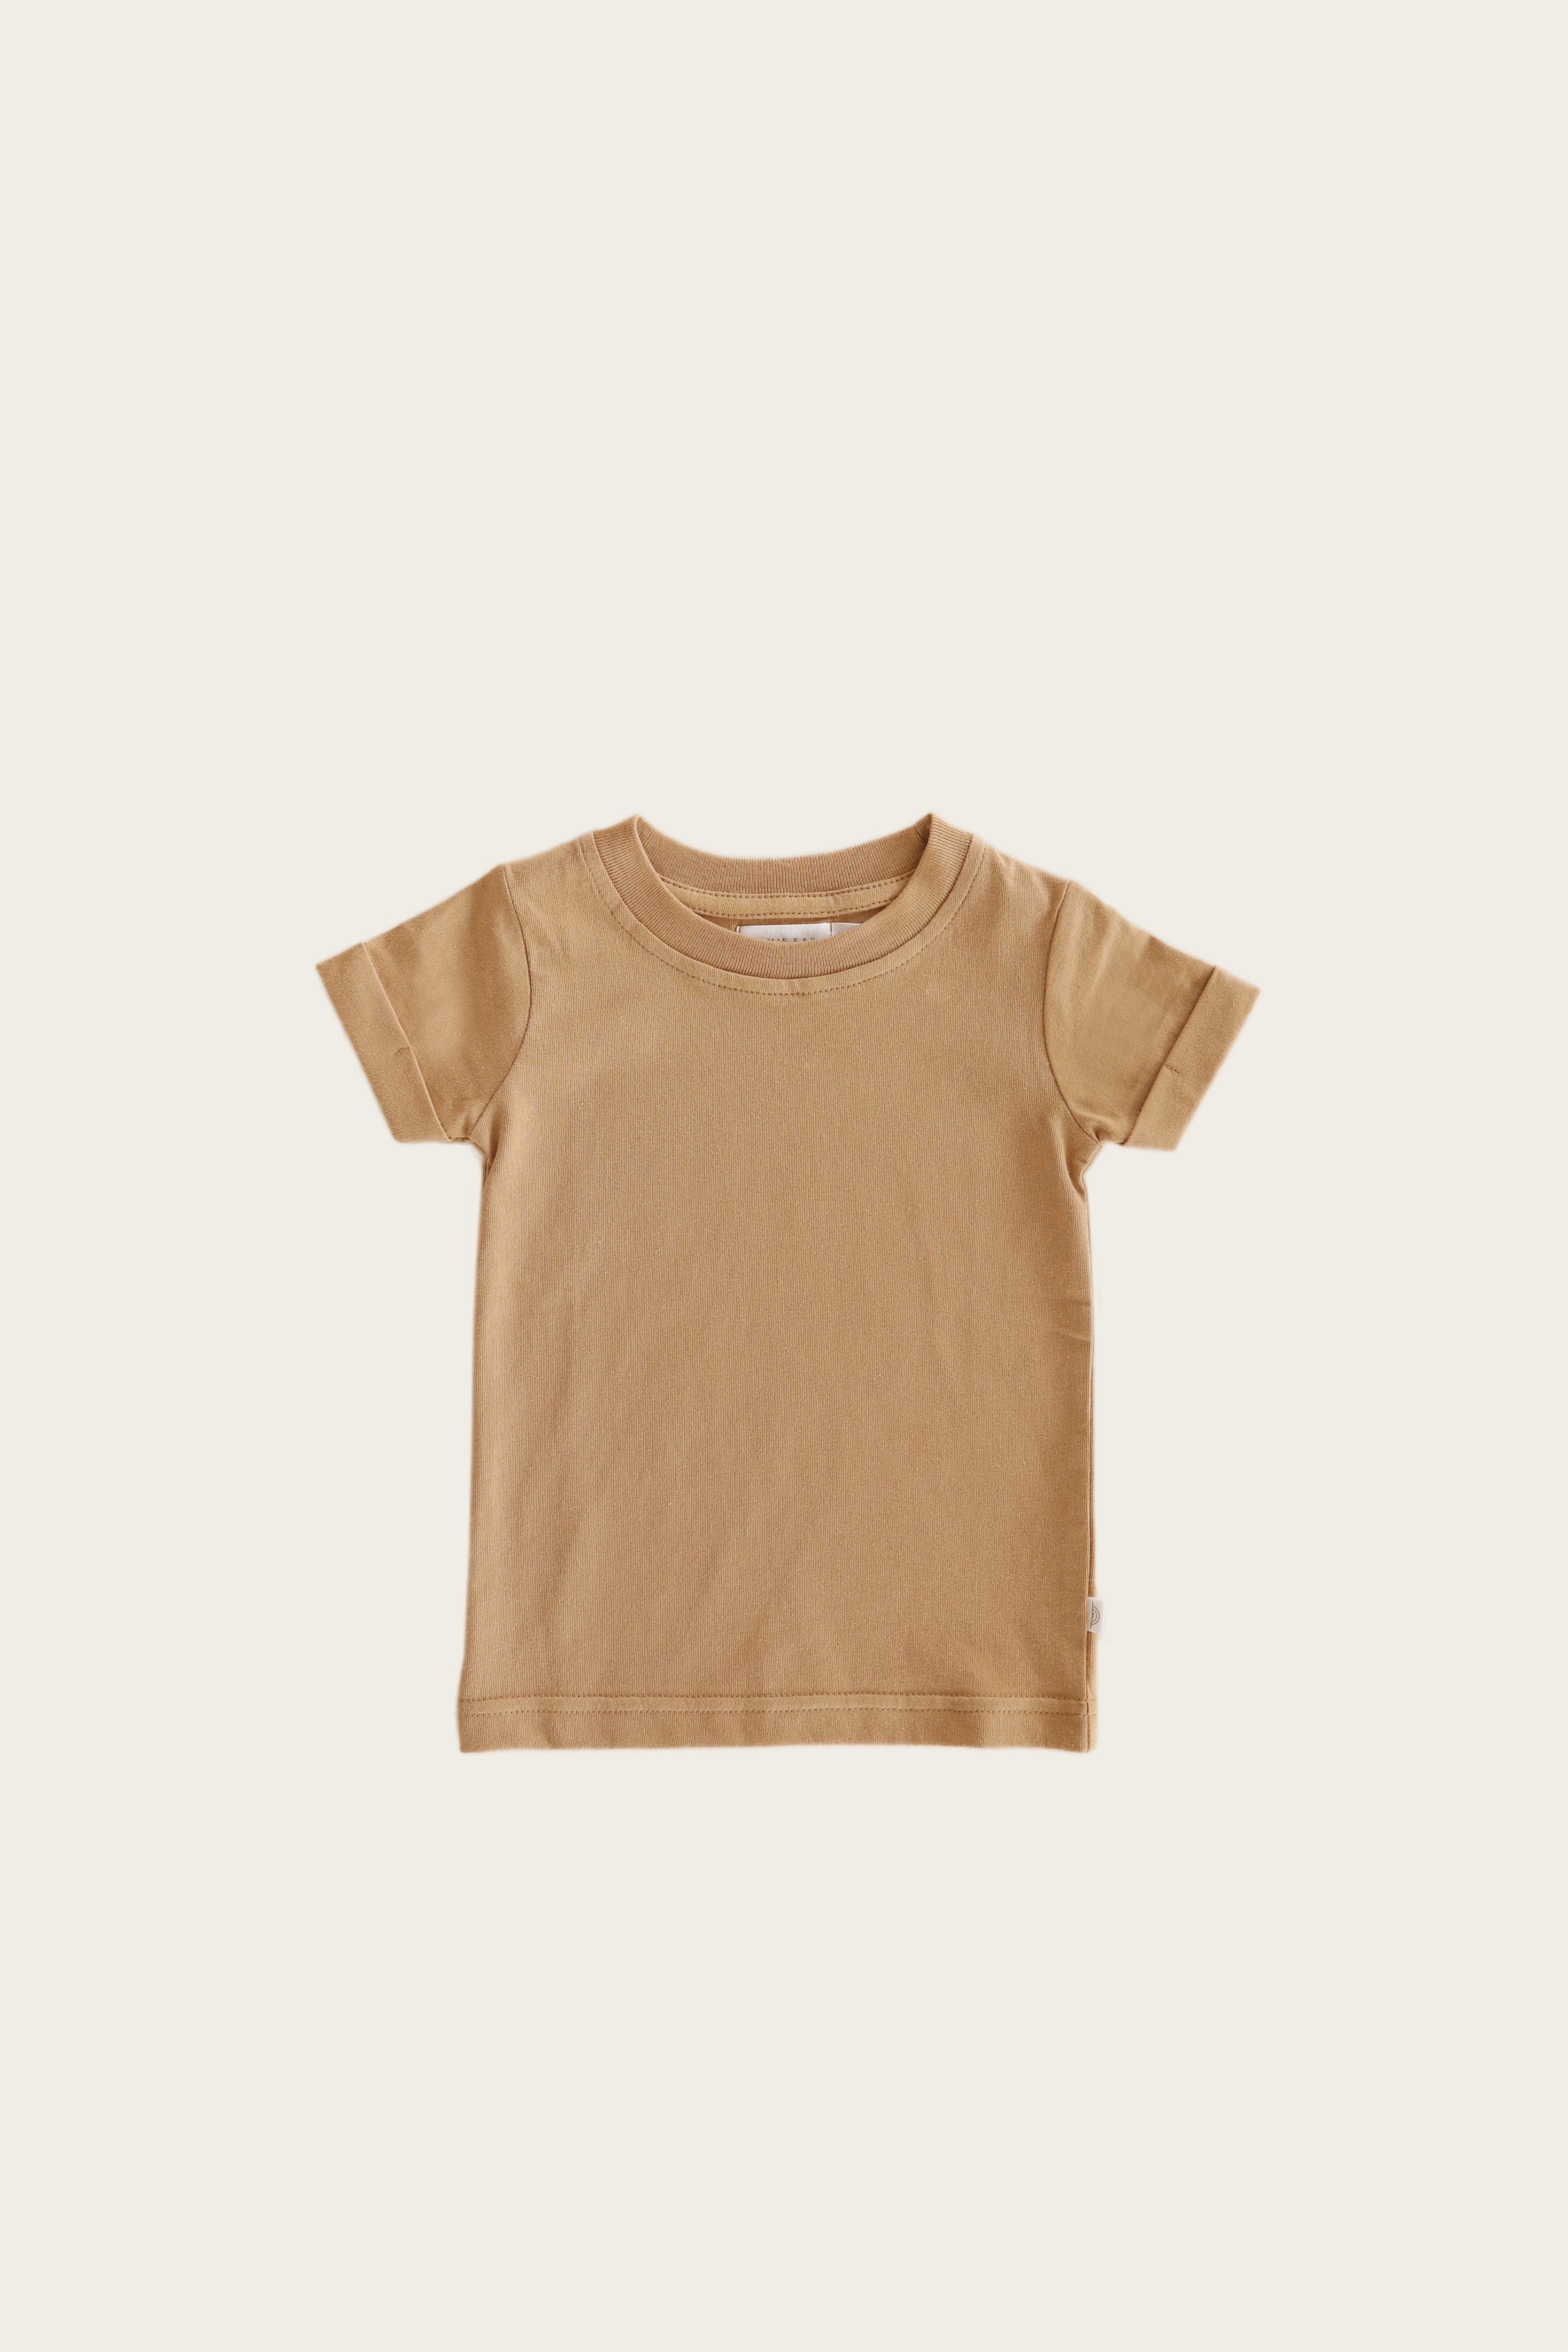 Organic Cotton Sam Tee in Desert by Jamie Kay – Pi Baby Boutique